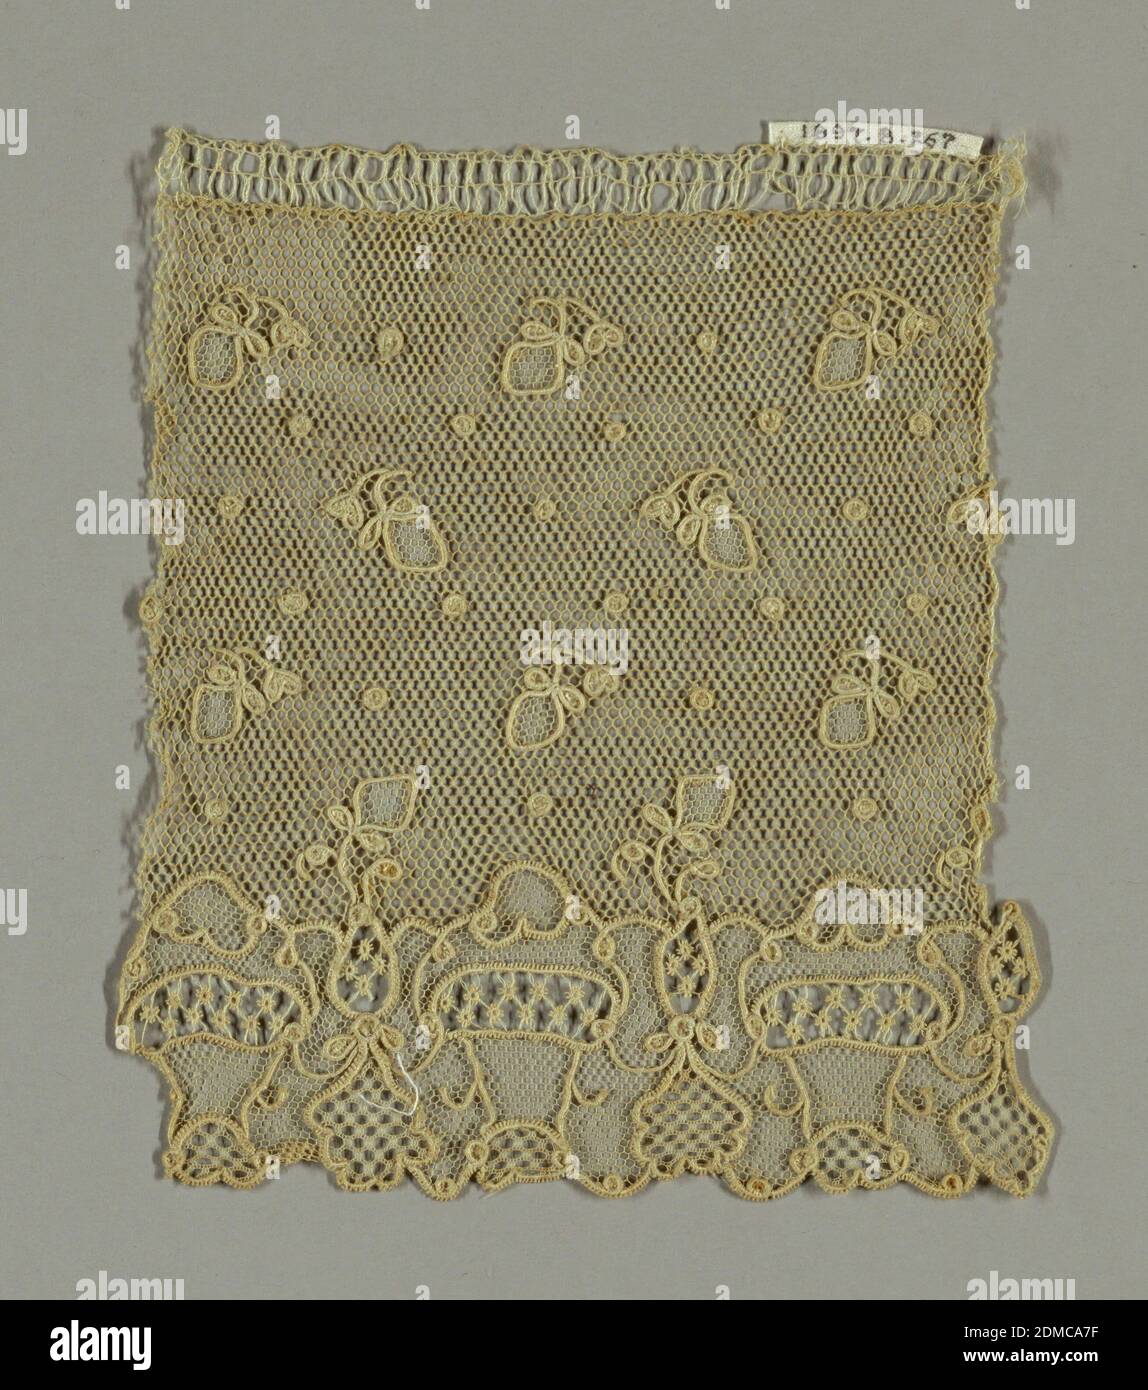 Fragment, Medium: linen Technique: needle lace, Fragment showing powdered dots and berries. Lower border has a repeat of baskets., France, late 18th century, lace, Fragment Stock Photo